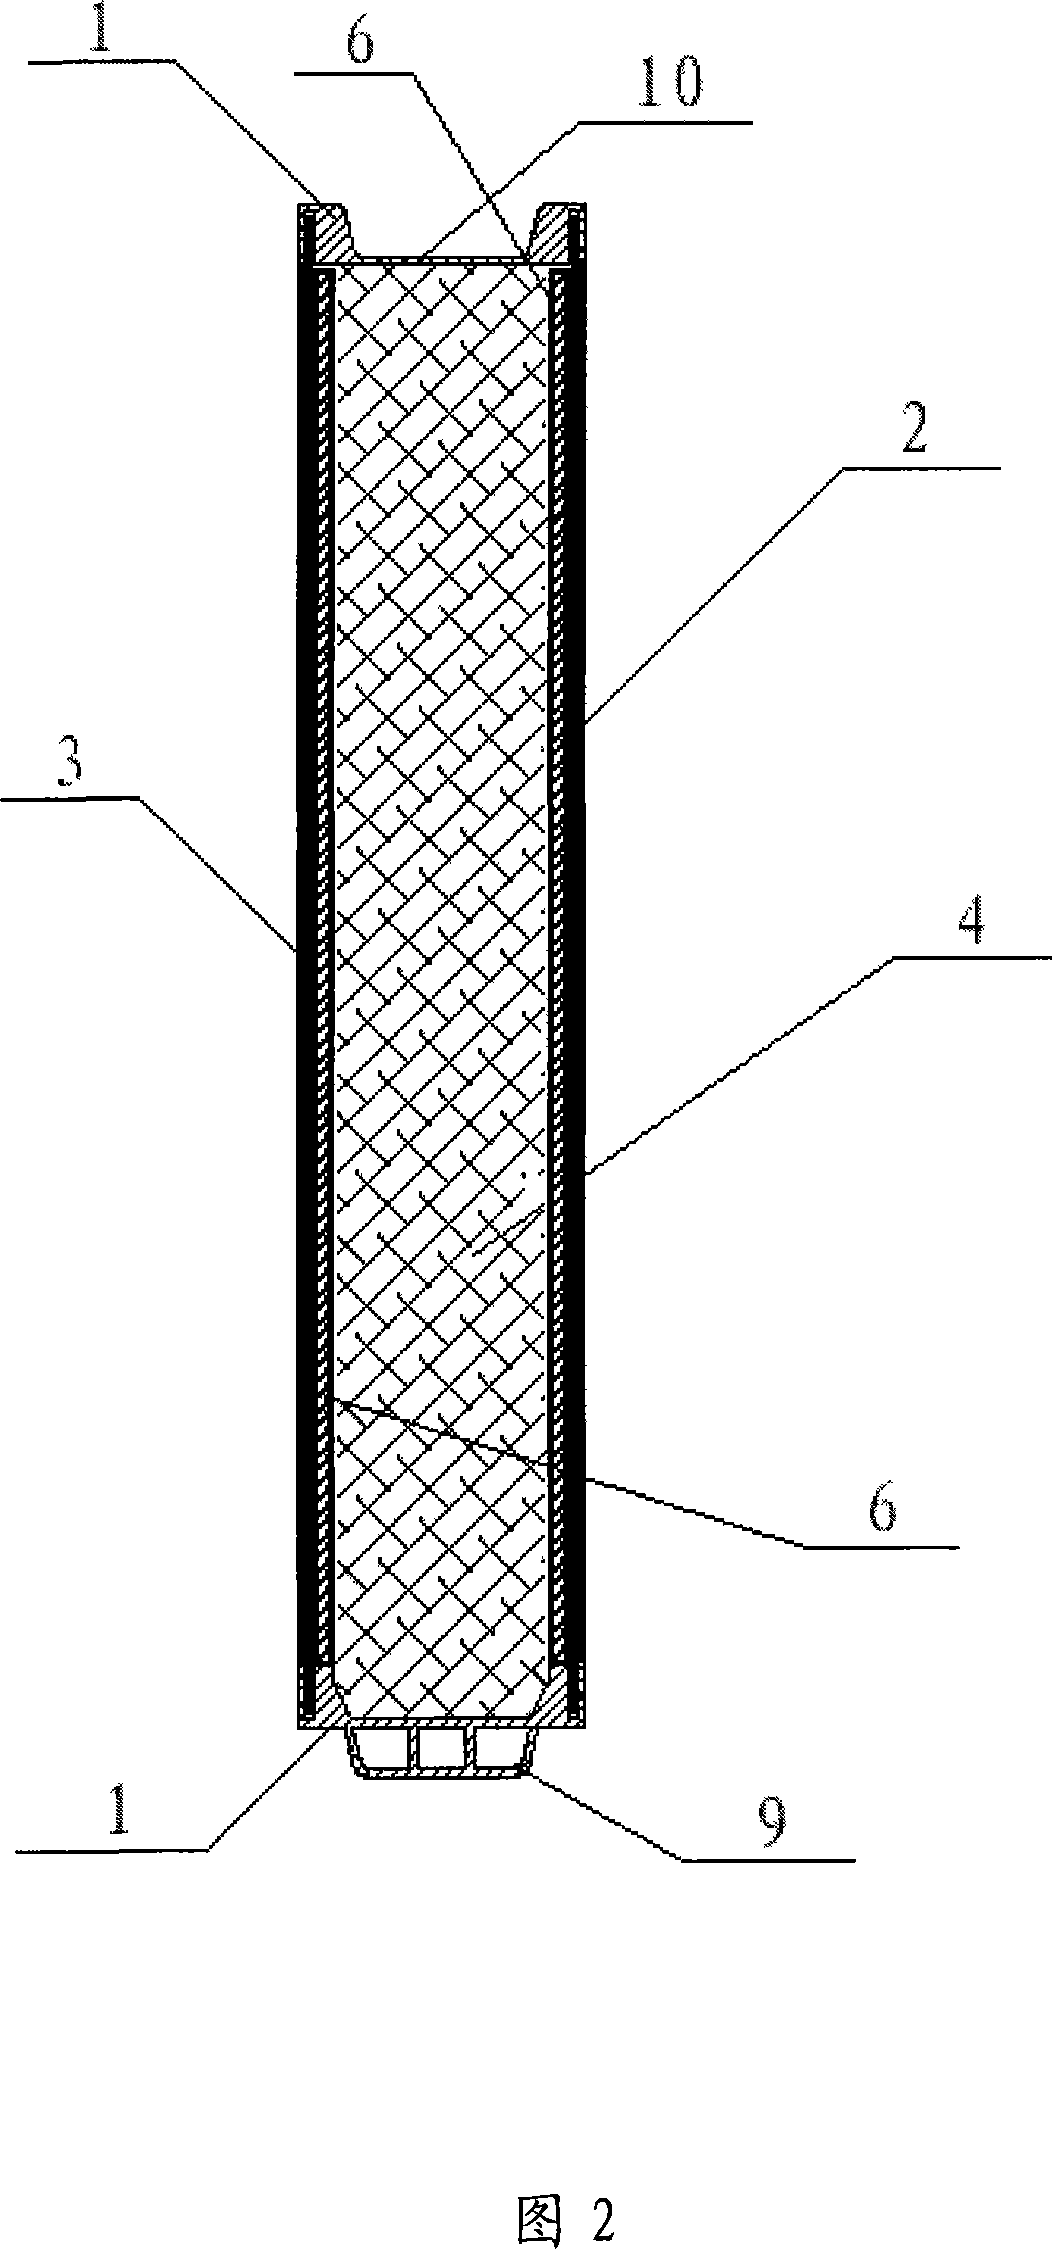 Hard polyvinyl chloride sound insulation barrier and manufacturing technique